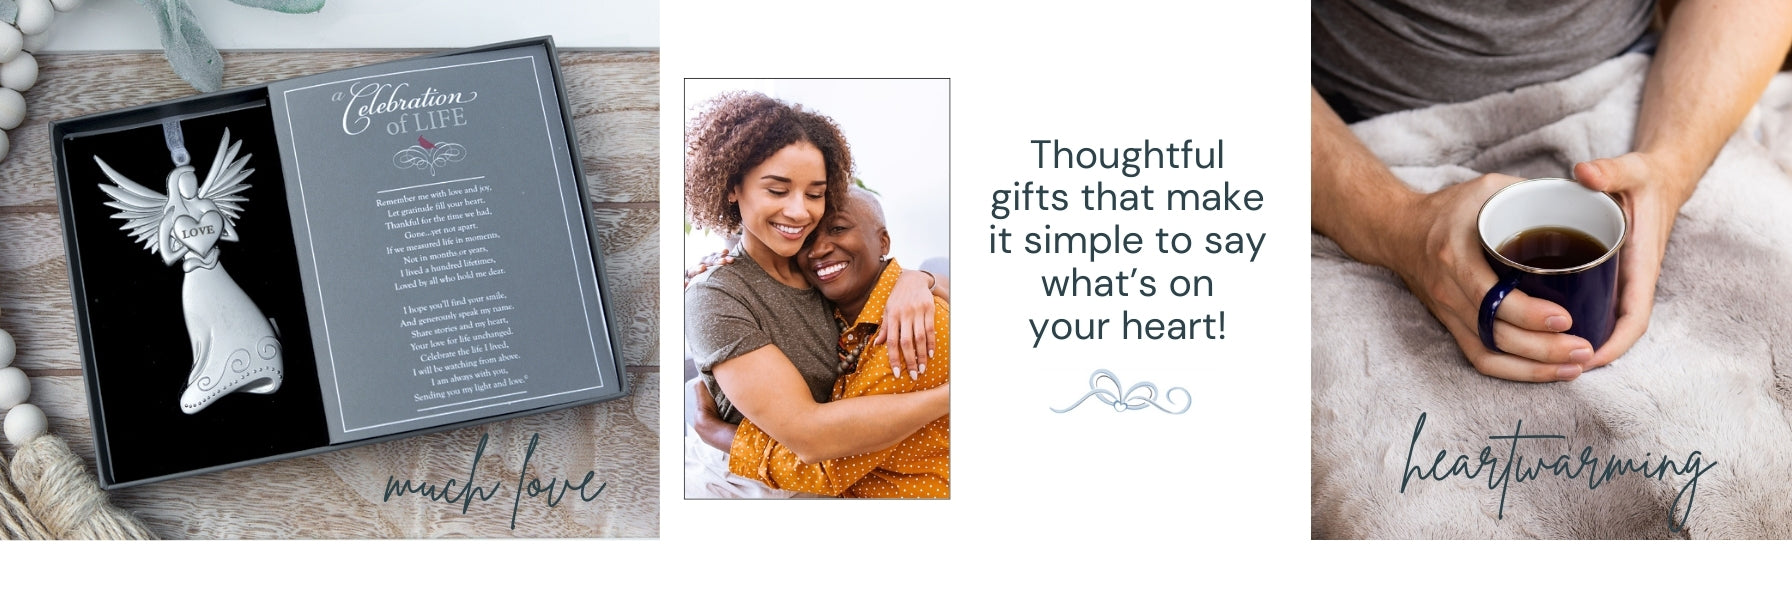 Thoughtful gifts that make it simple to say what's on your heart!